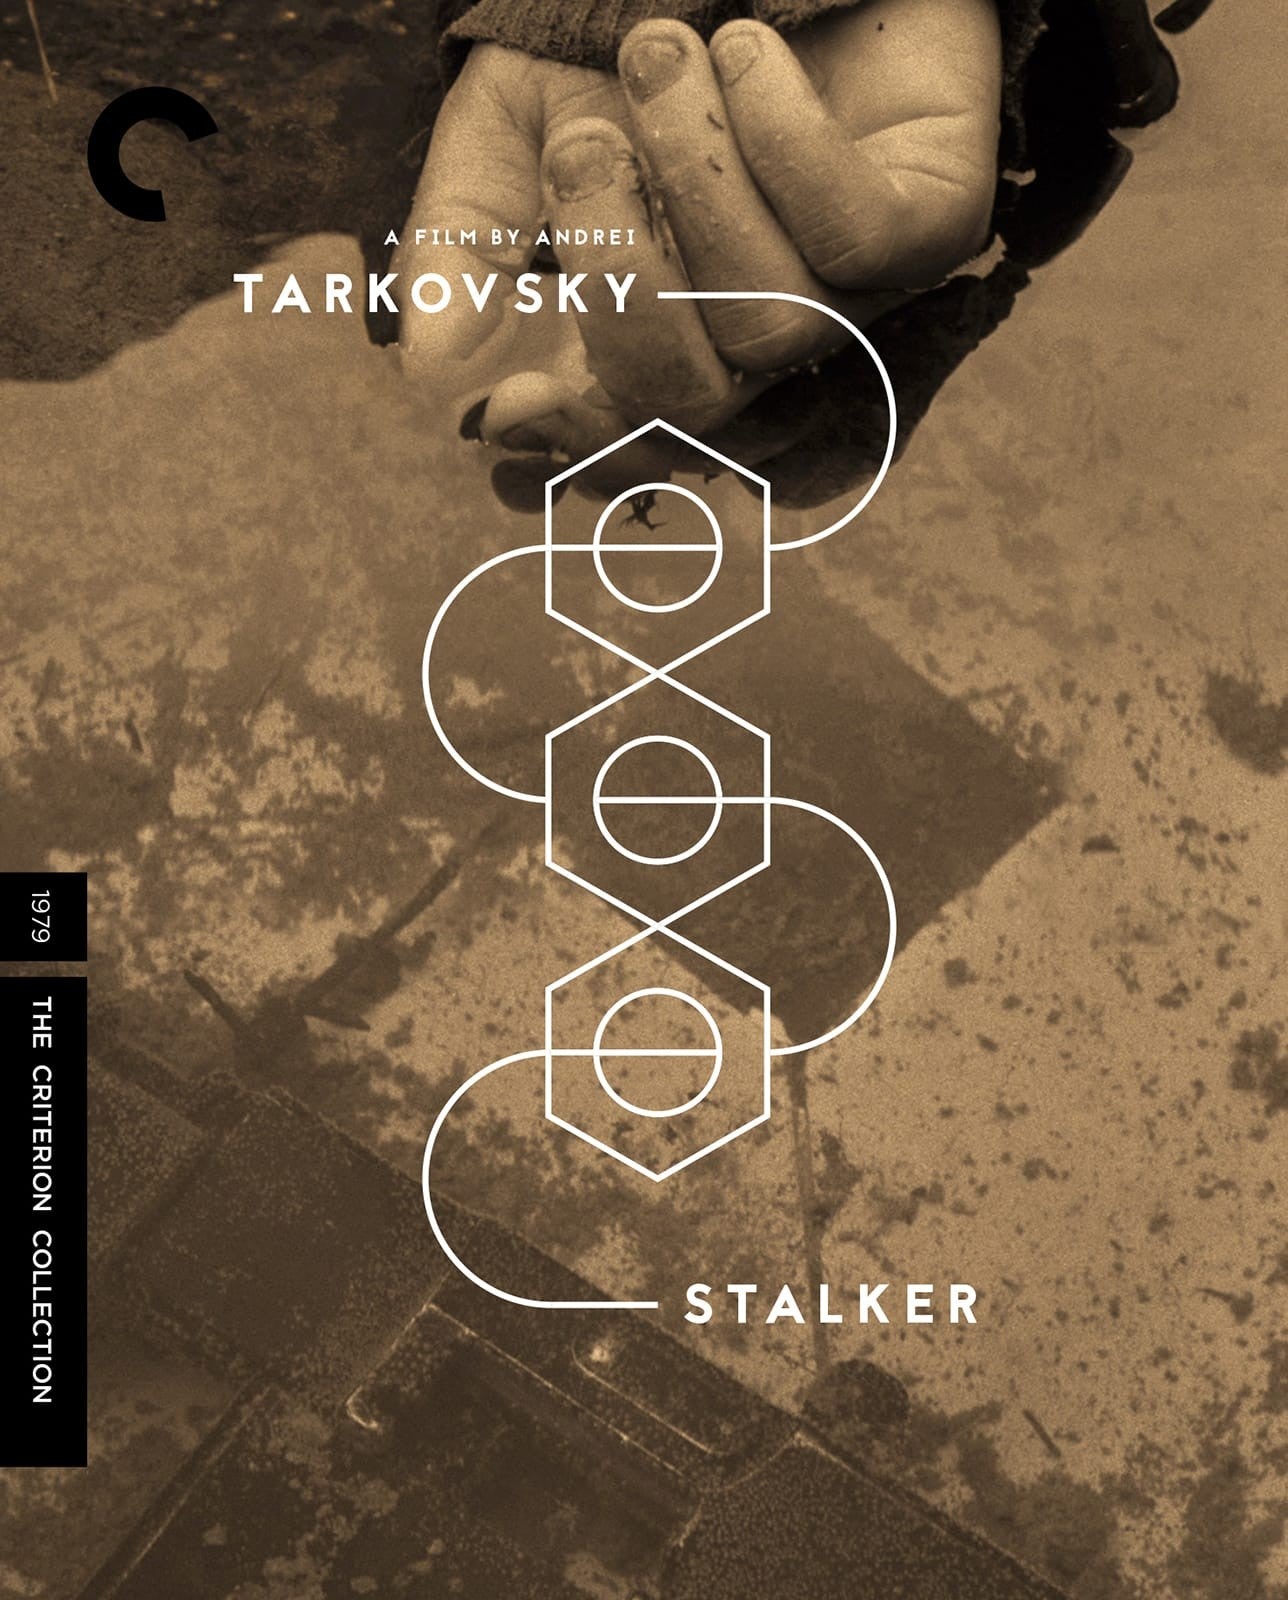 Stalker - Criterion Collection (Blu-ray)